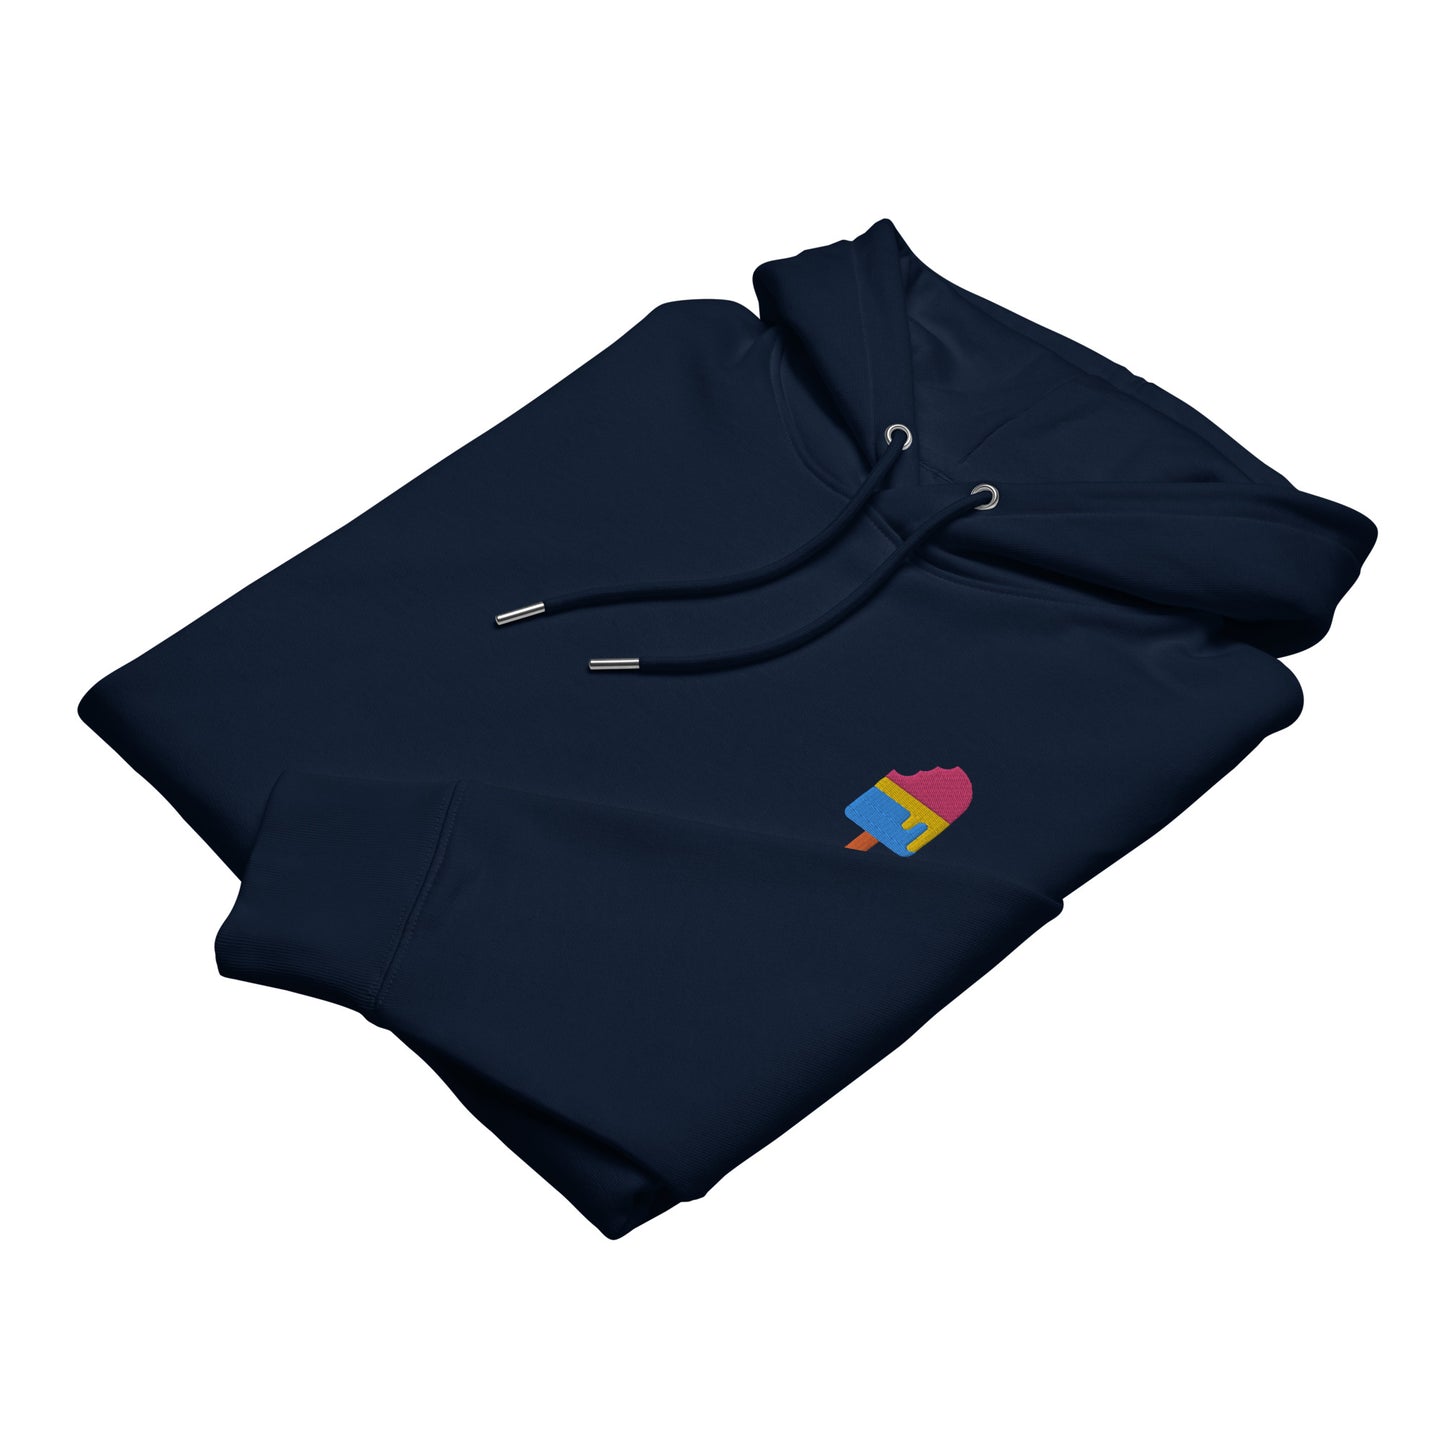 Unisex eco-friendly french navy hoodie featuring on the upper left chest; a subtle embroidered melting ice cream in pansexual colors, adding a touch of lgbtq to your outfit.sizes: small, medium, large, extra large, double extra large.